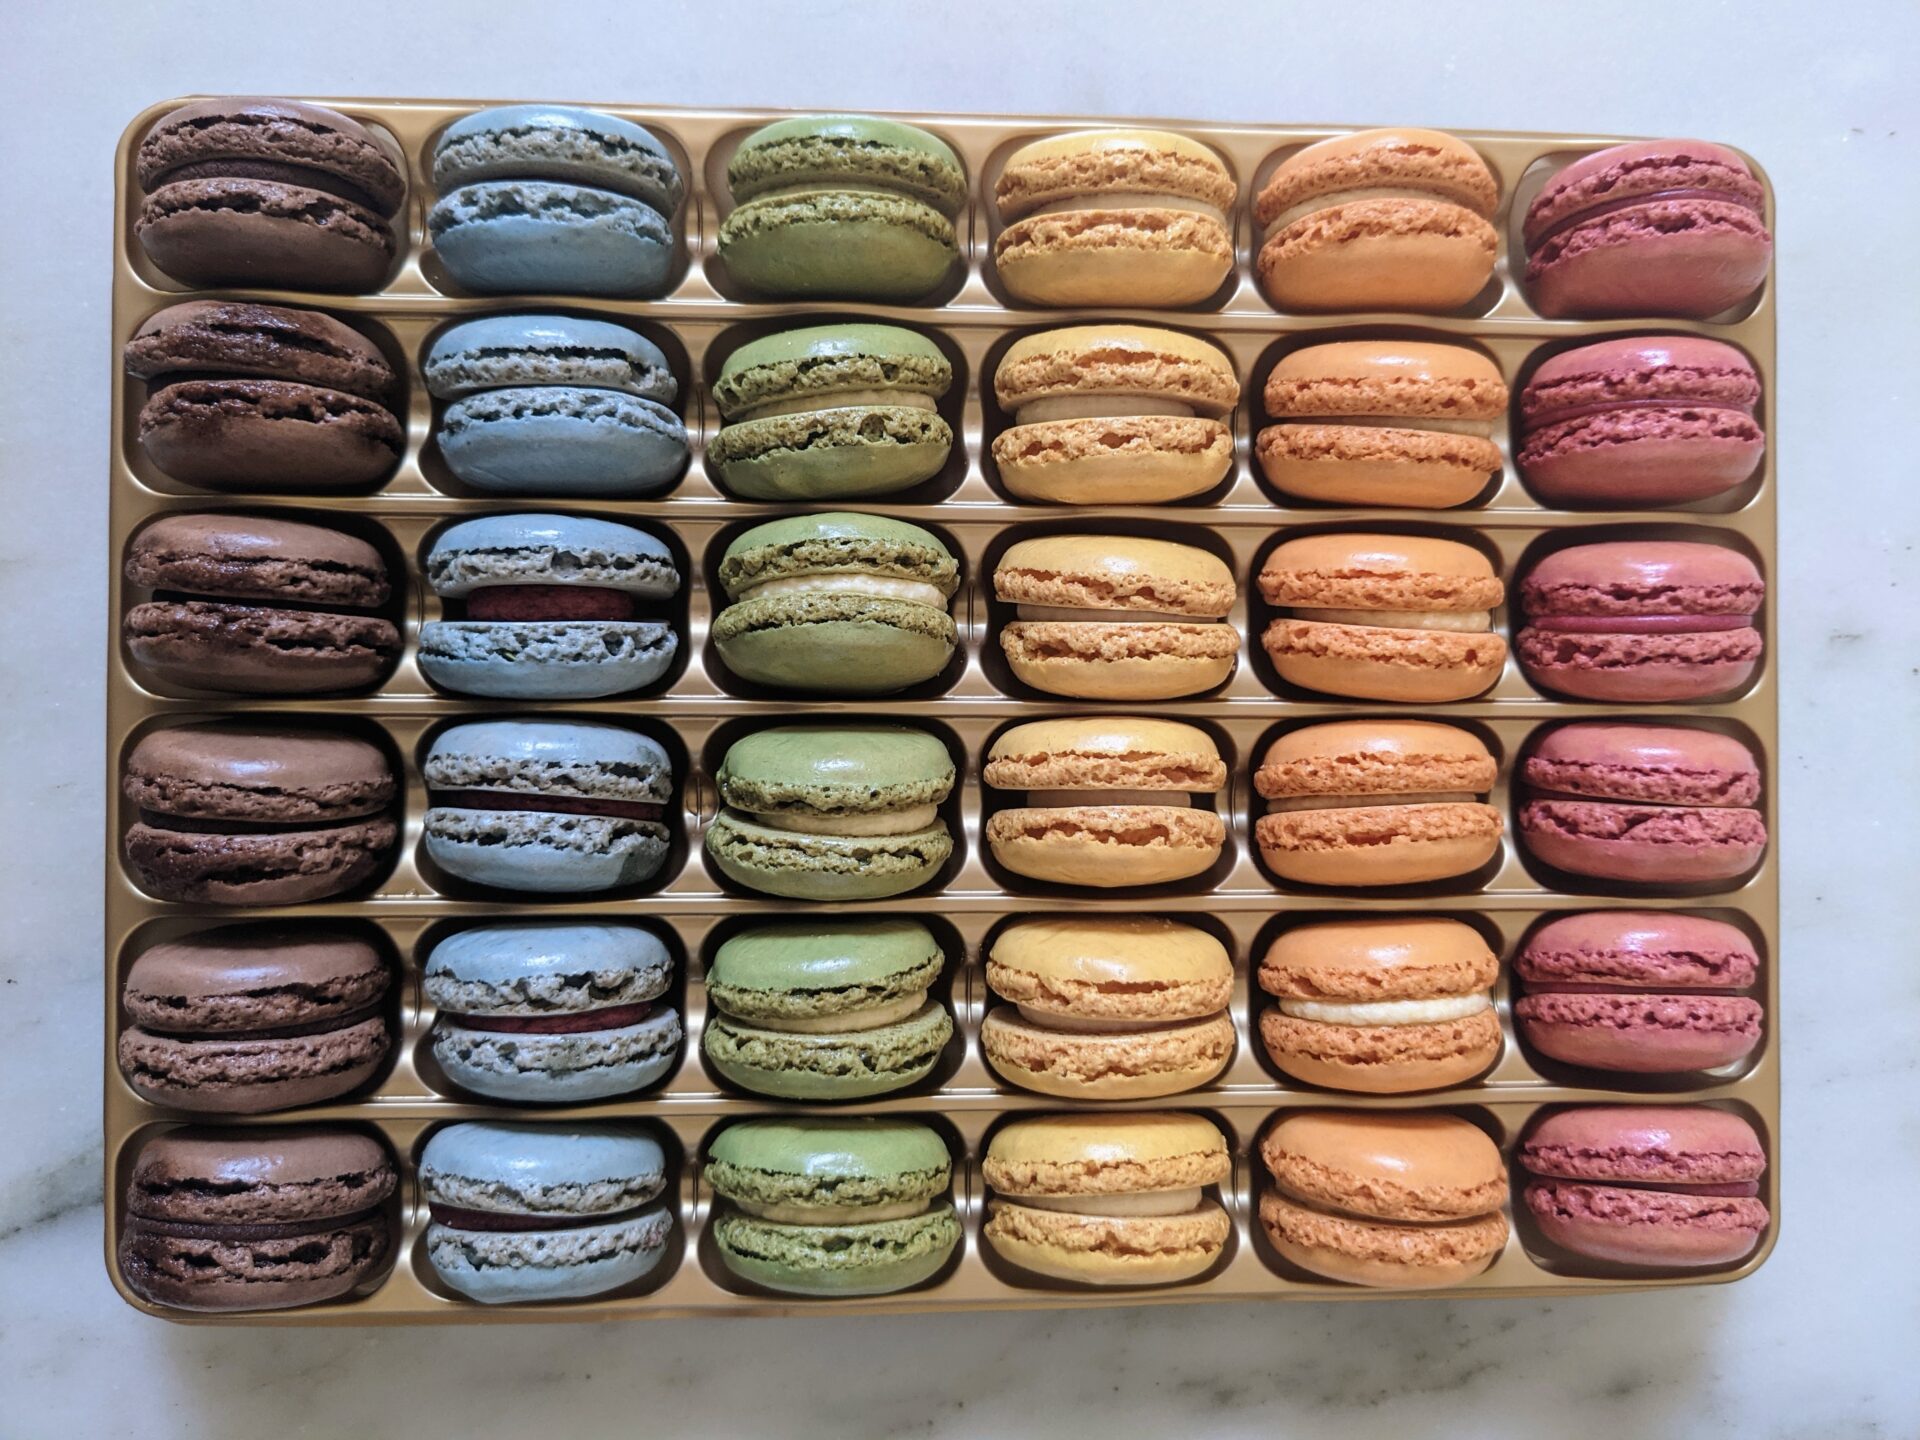 Costco French Macarons Honest Review + Pro Tips